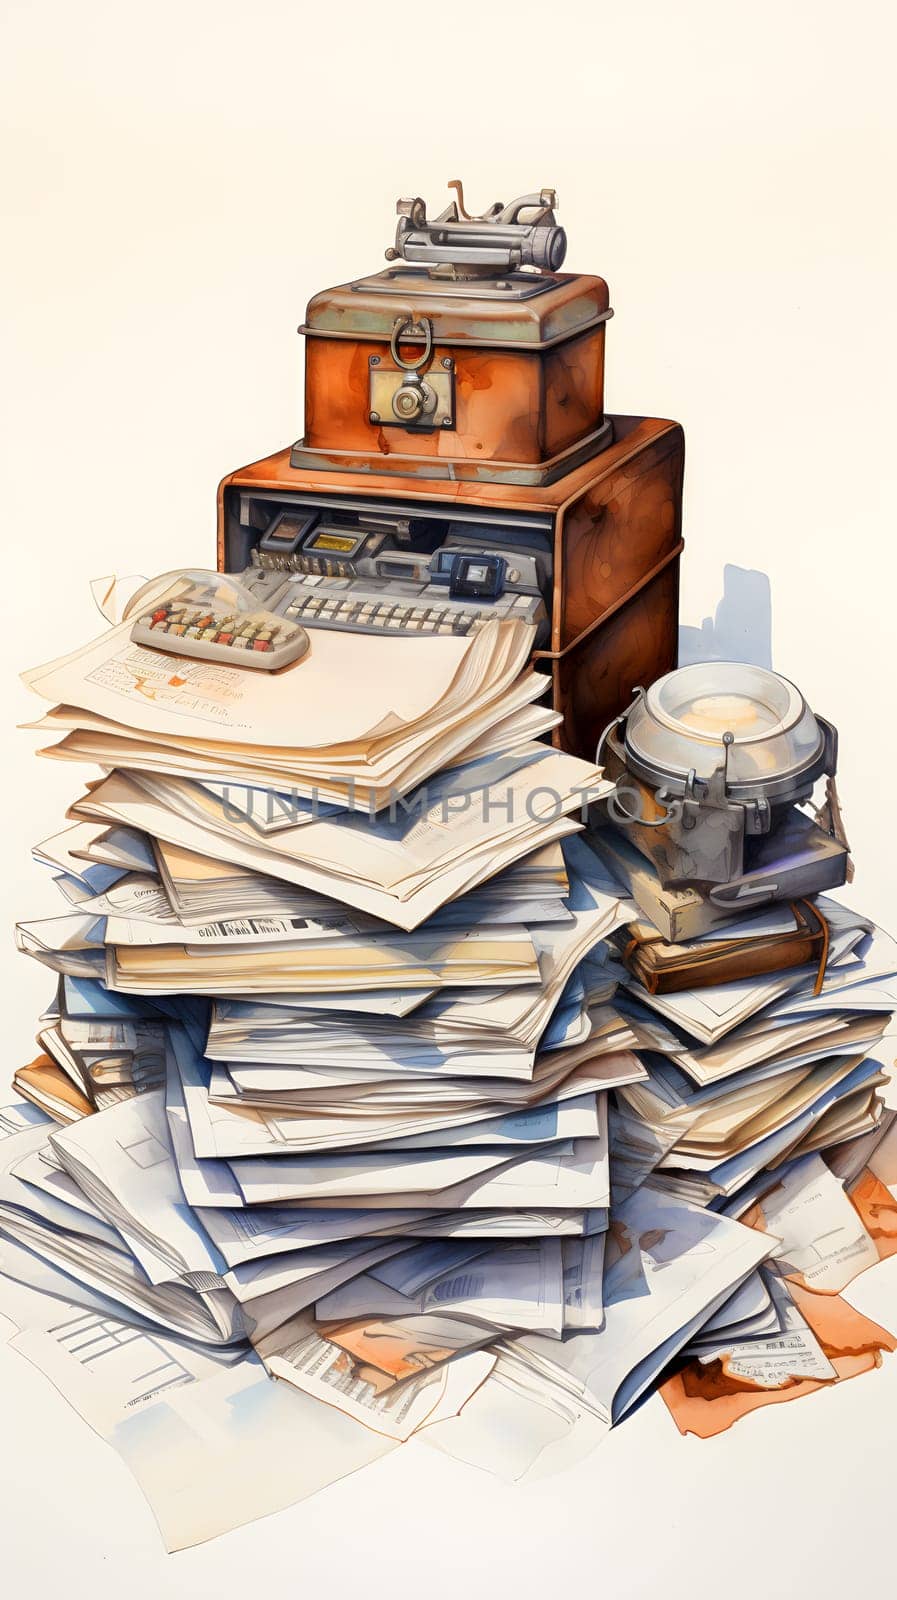 Paper Mountain: A Telephone Atop a Tower of Documents by Nadtochiy